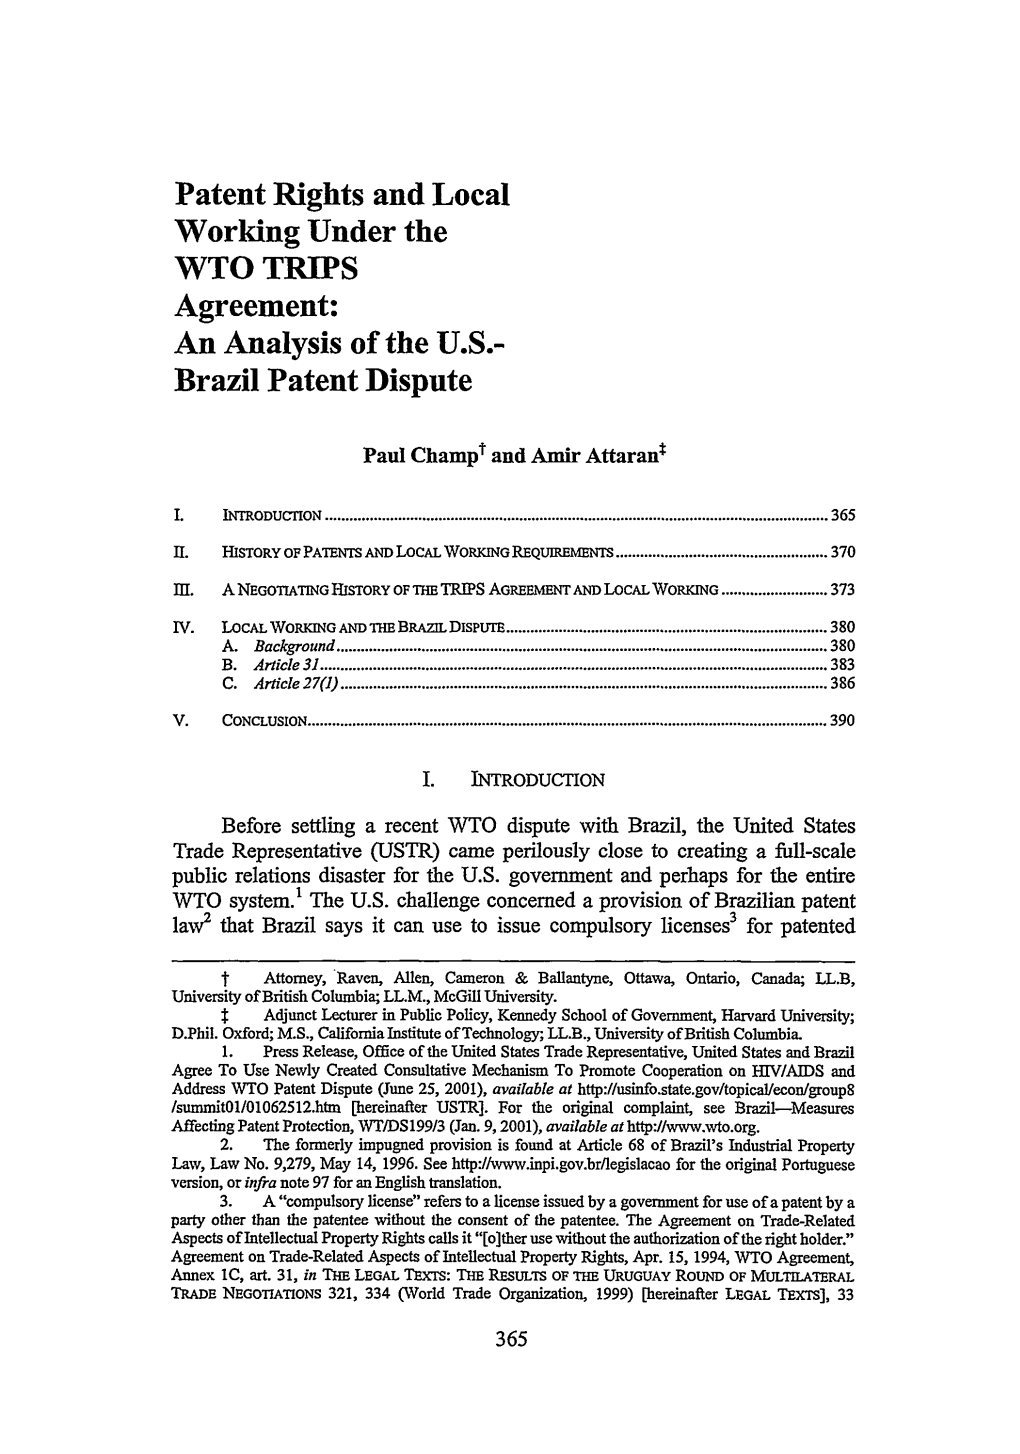 Patent Rights and Local Working Under the WTO TRIPS Agreement: an Analysis of the U.S.- Brazil Patent Dispute